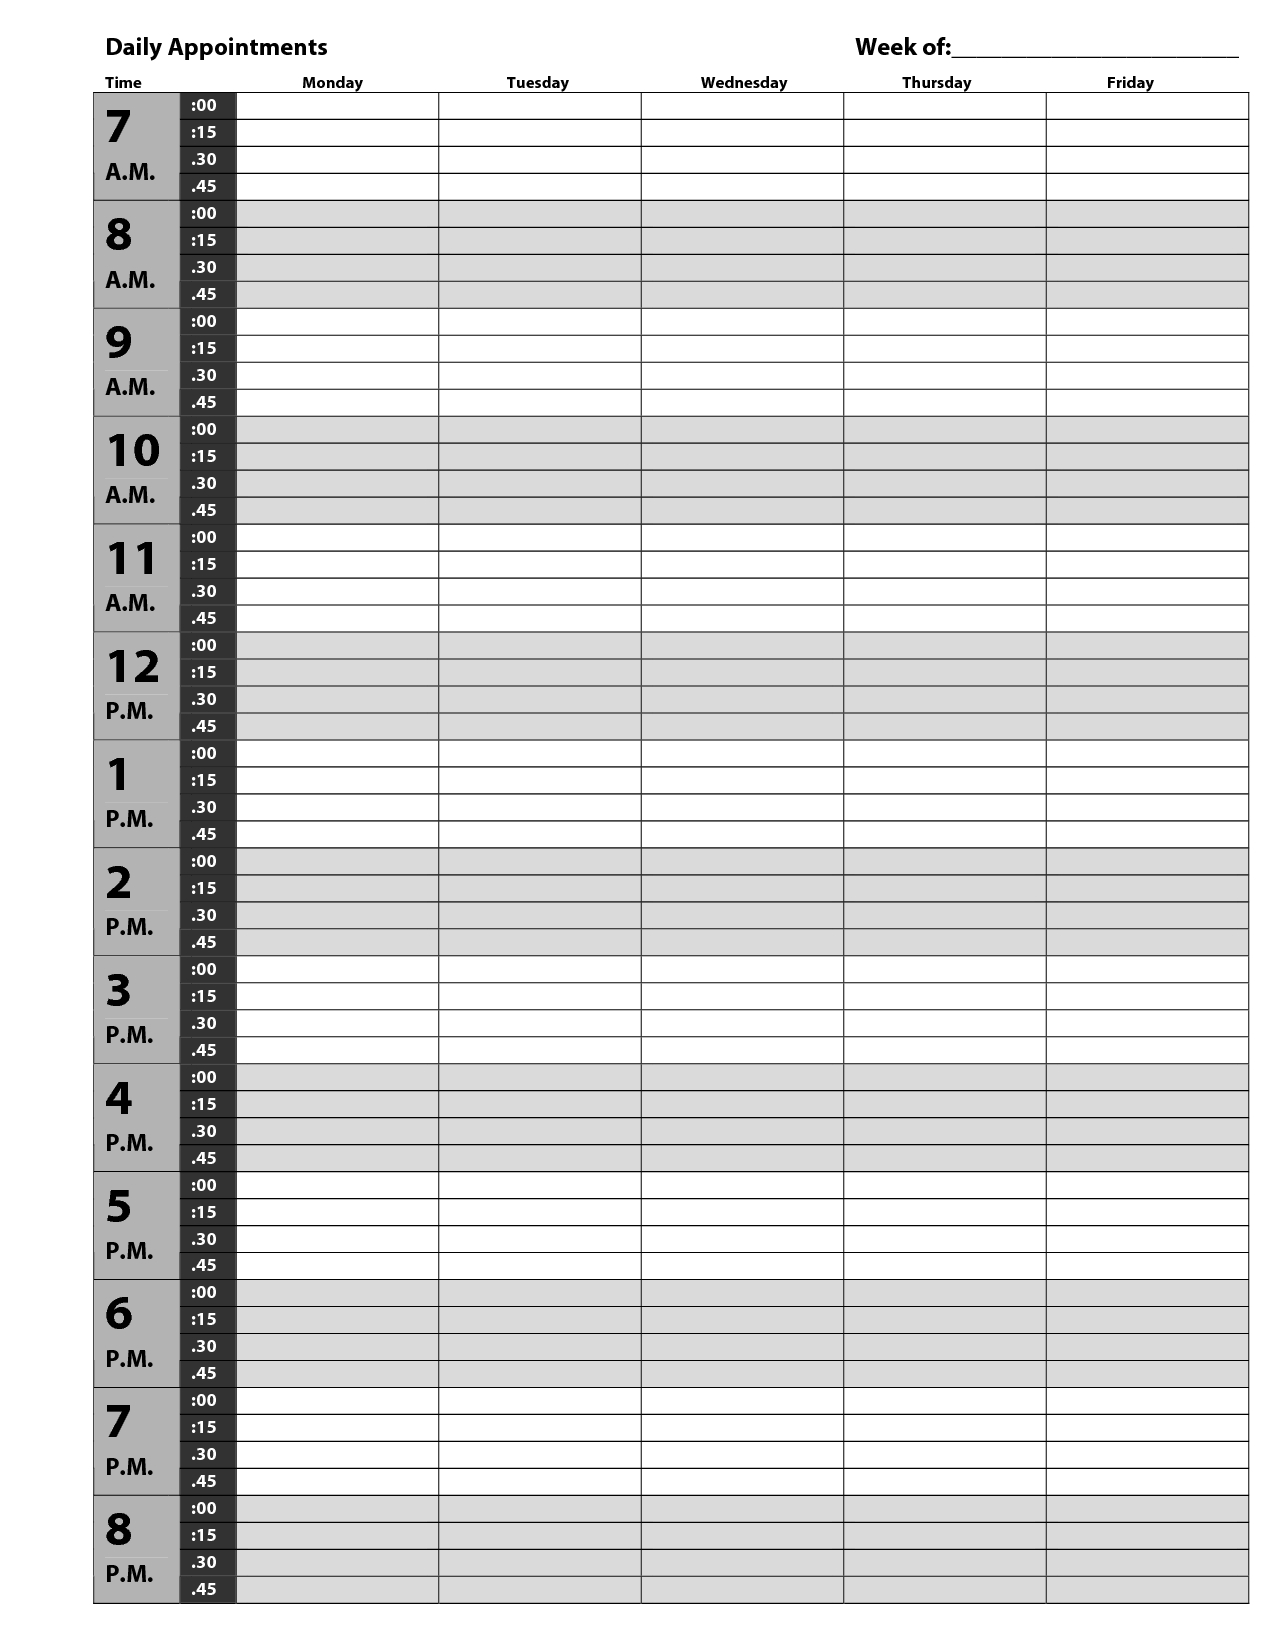 Appointment Book - Pdf | Appointment Calendar, Daily with regard to Monday Through Friday Appointment Calendar